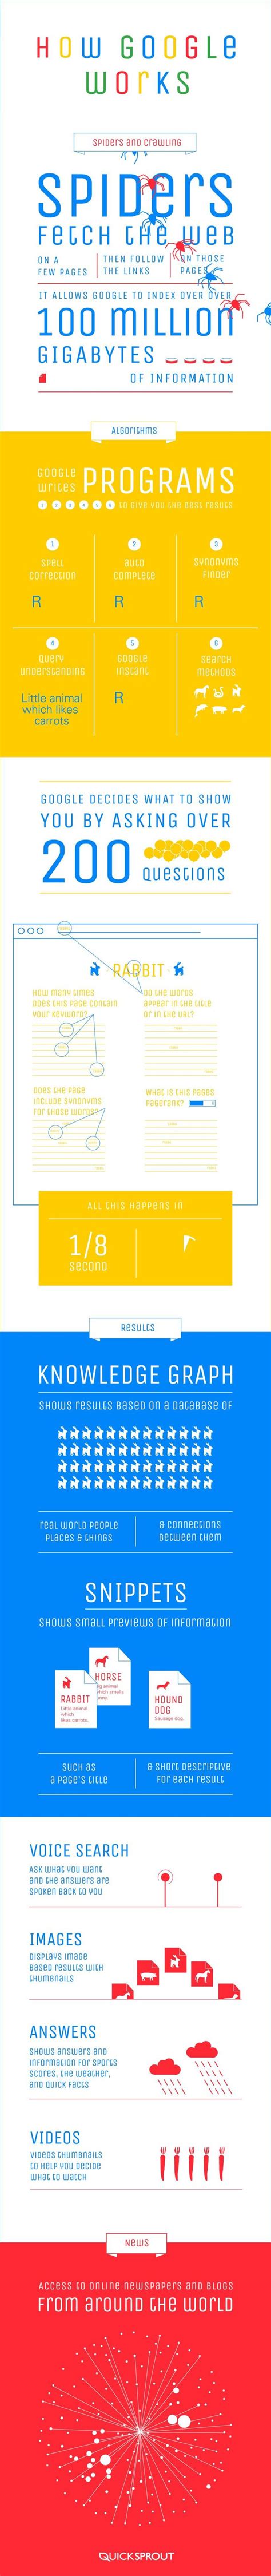 google search work infographics infographic marketing social